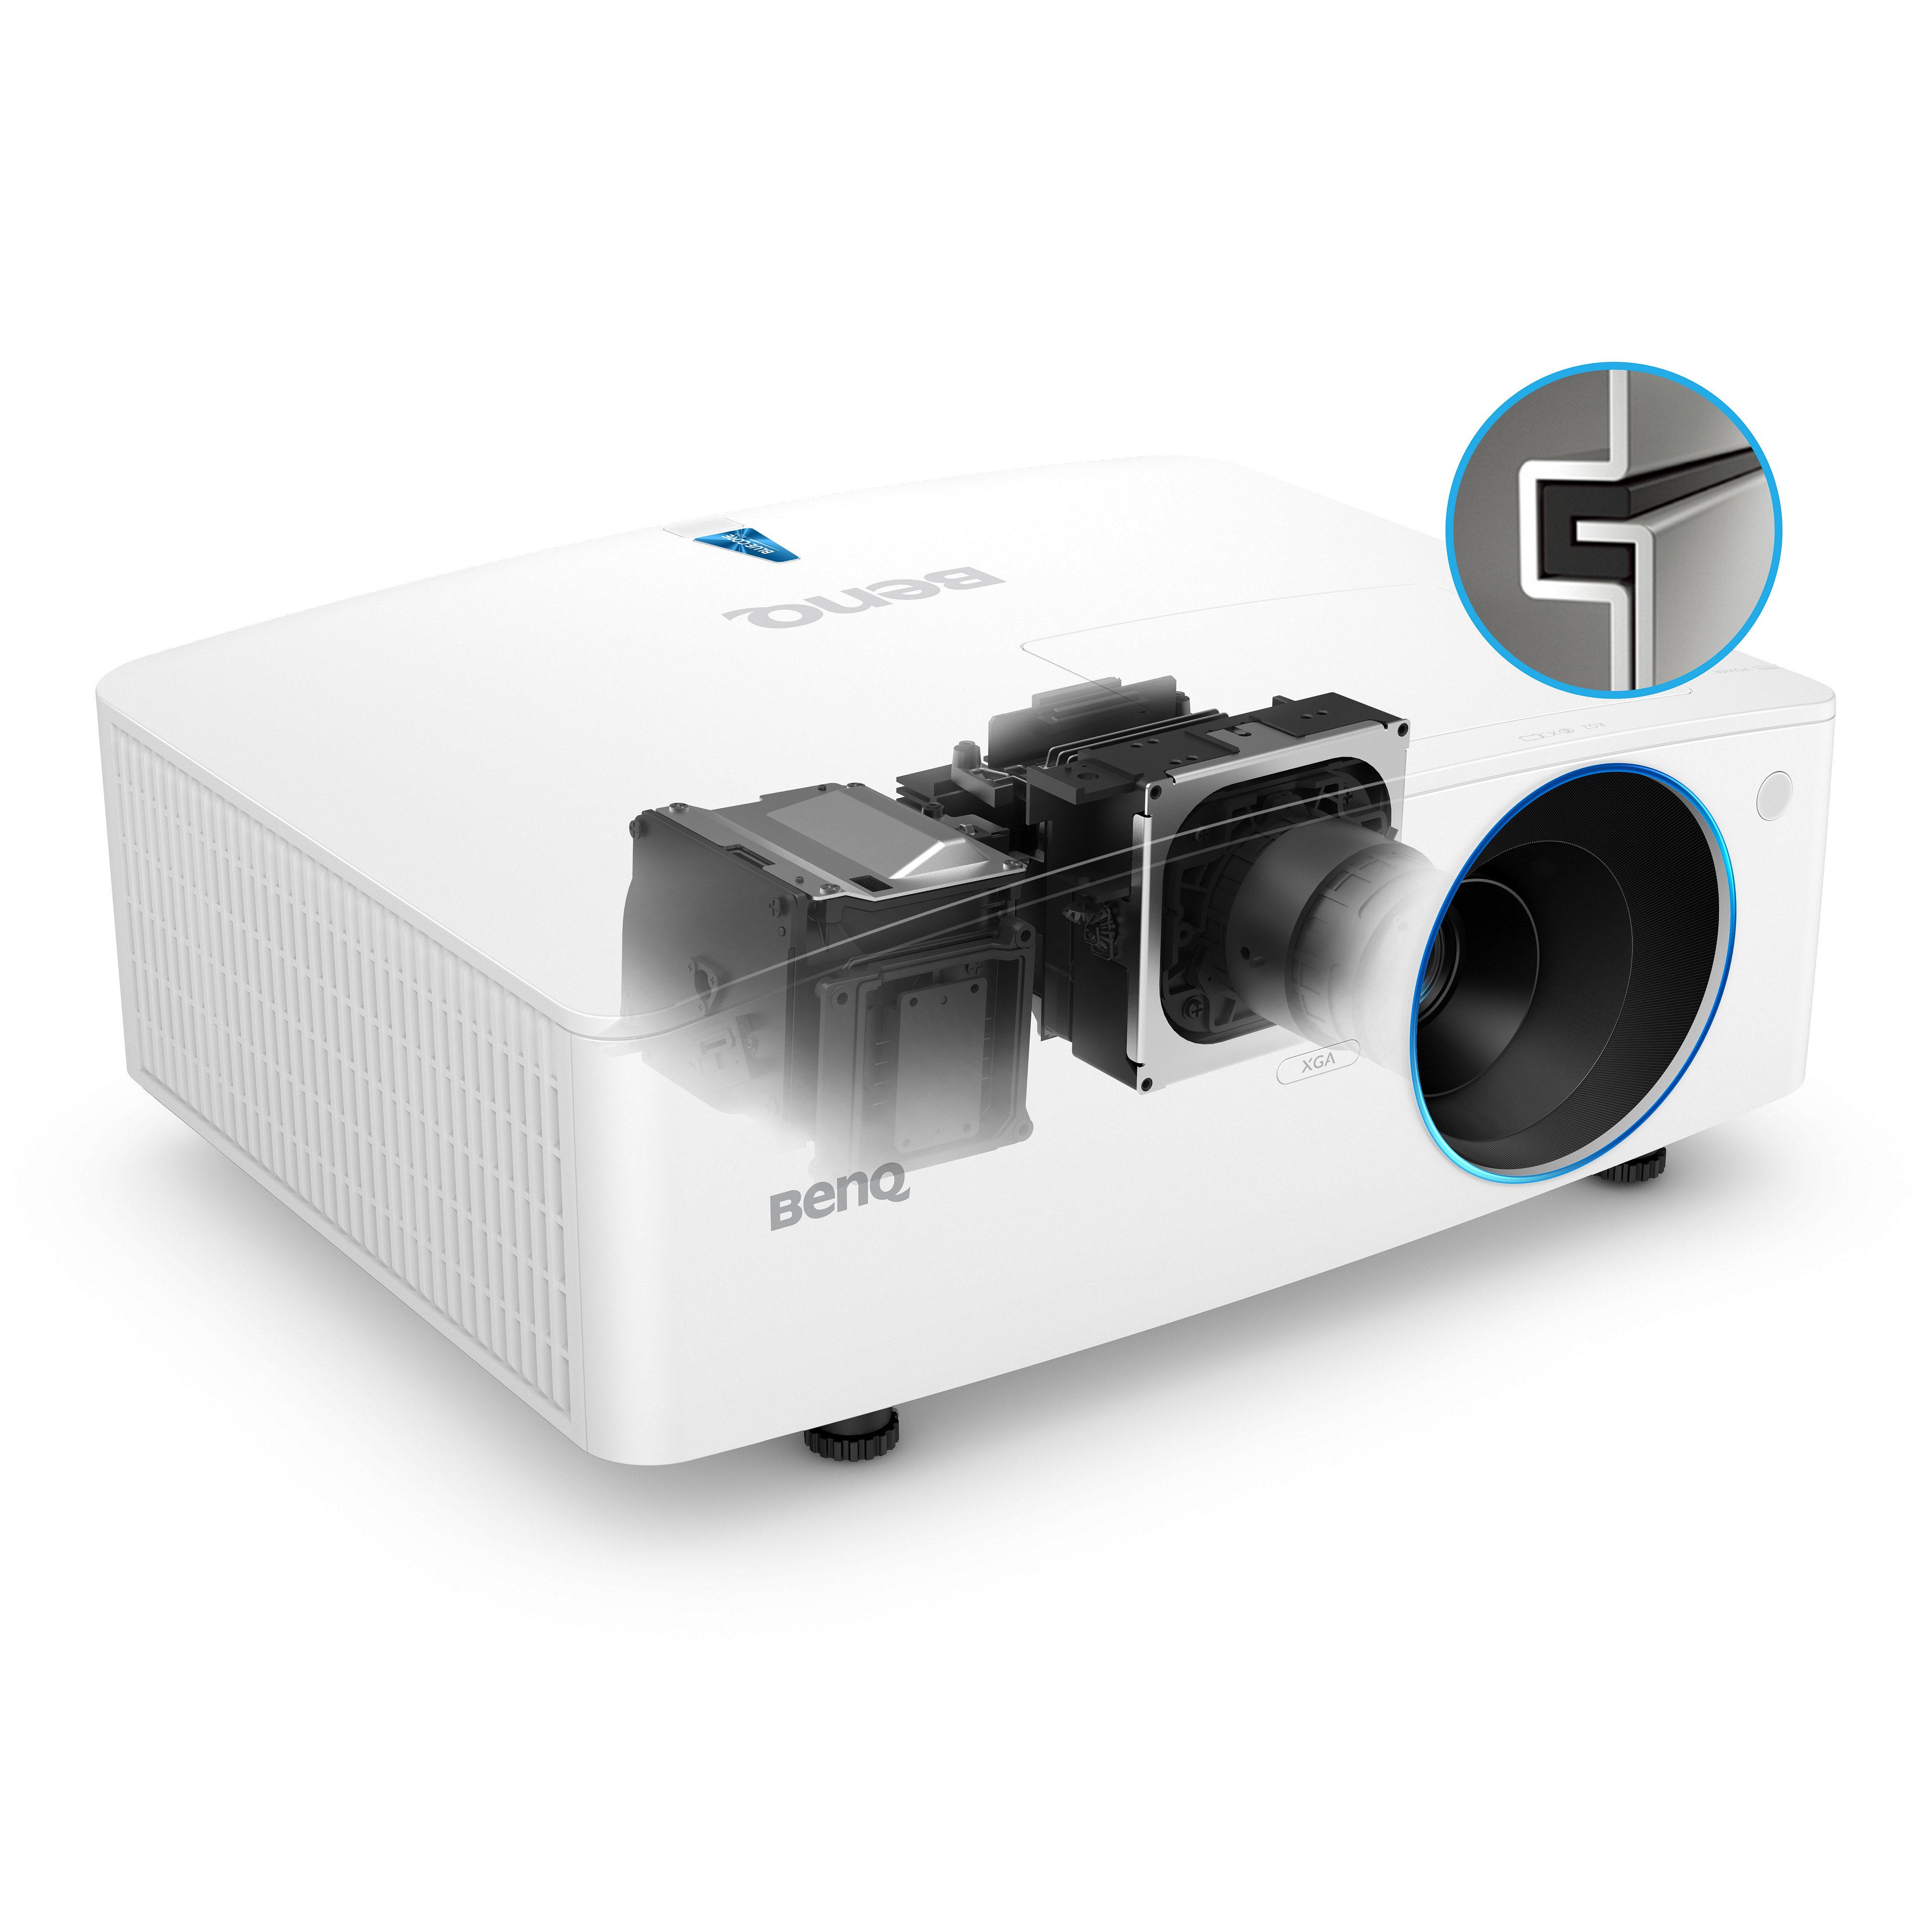 BenQ LU710 WUXGA BlueCore Laser Conference Room Projector is designed with dustproofing function, which enables outstanding performance even in severe conditions.